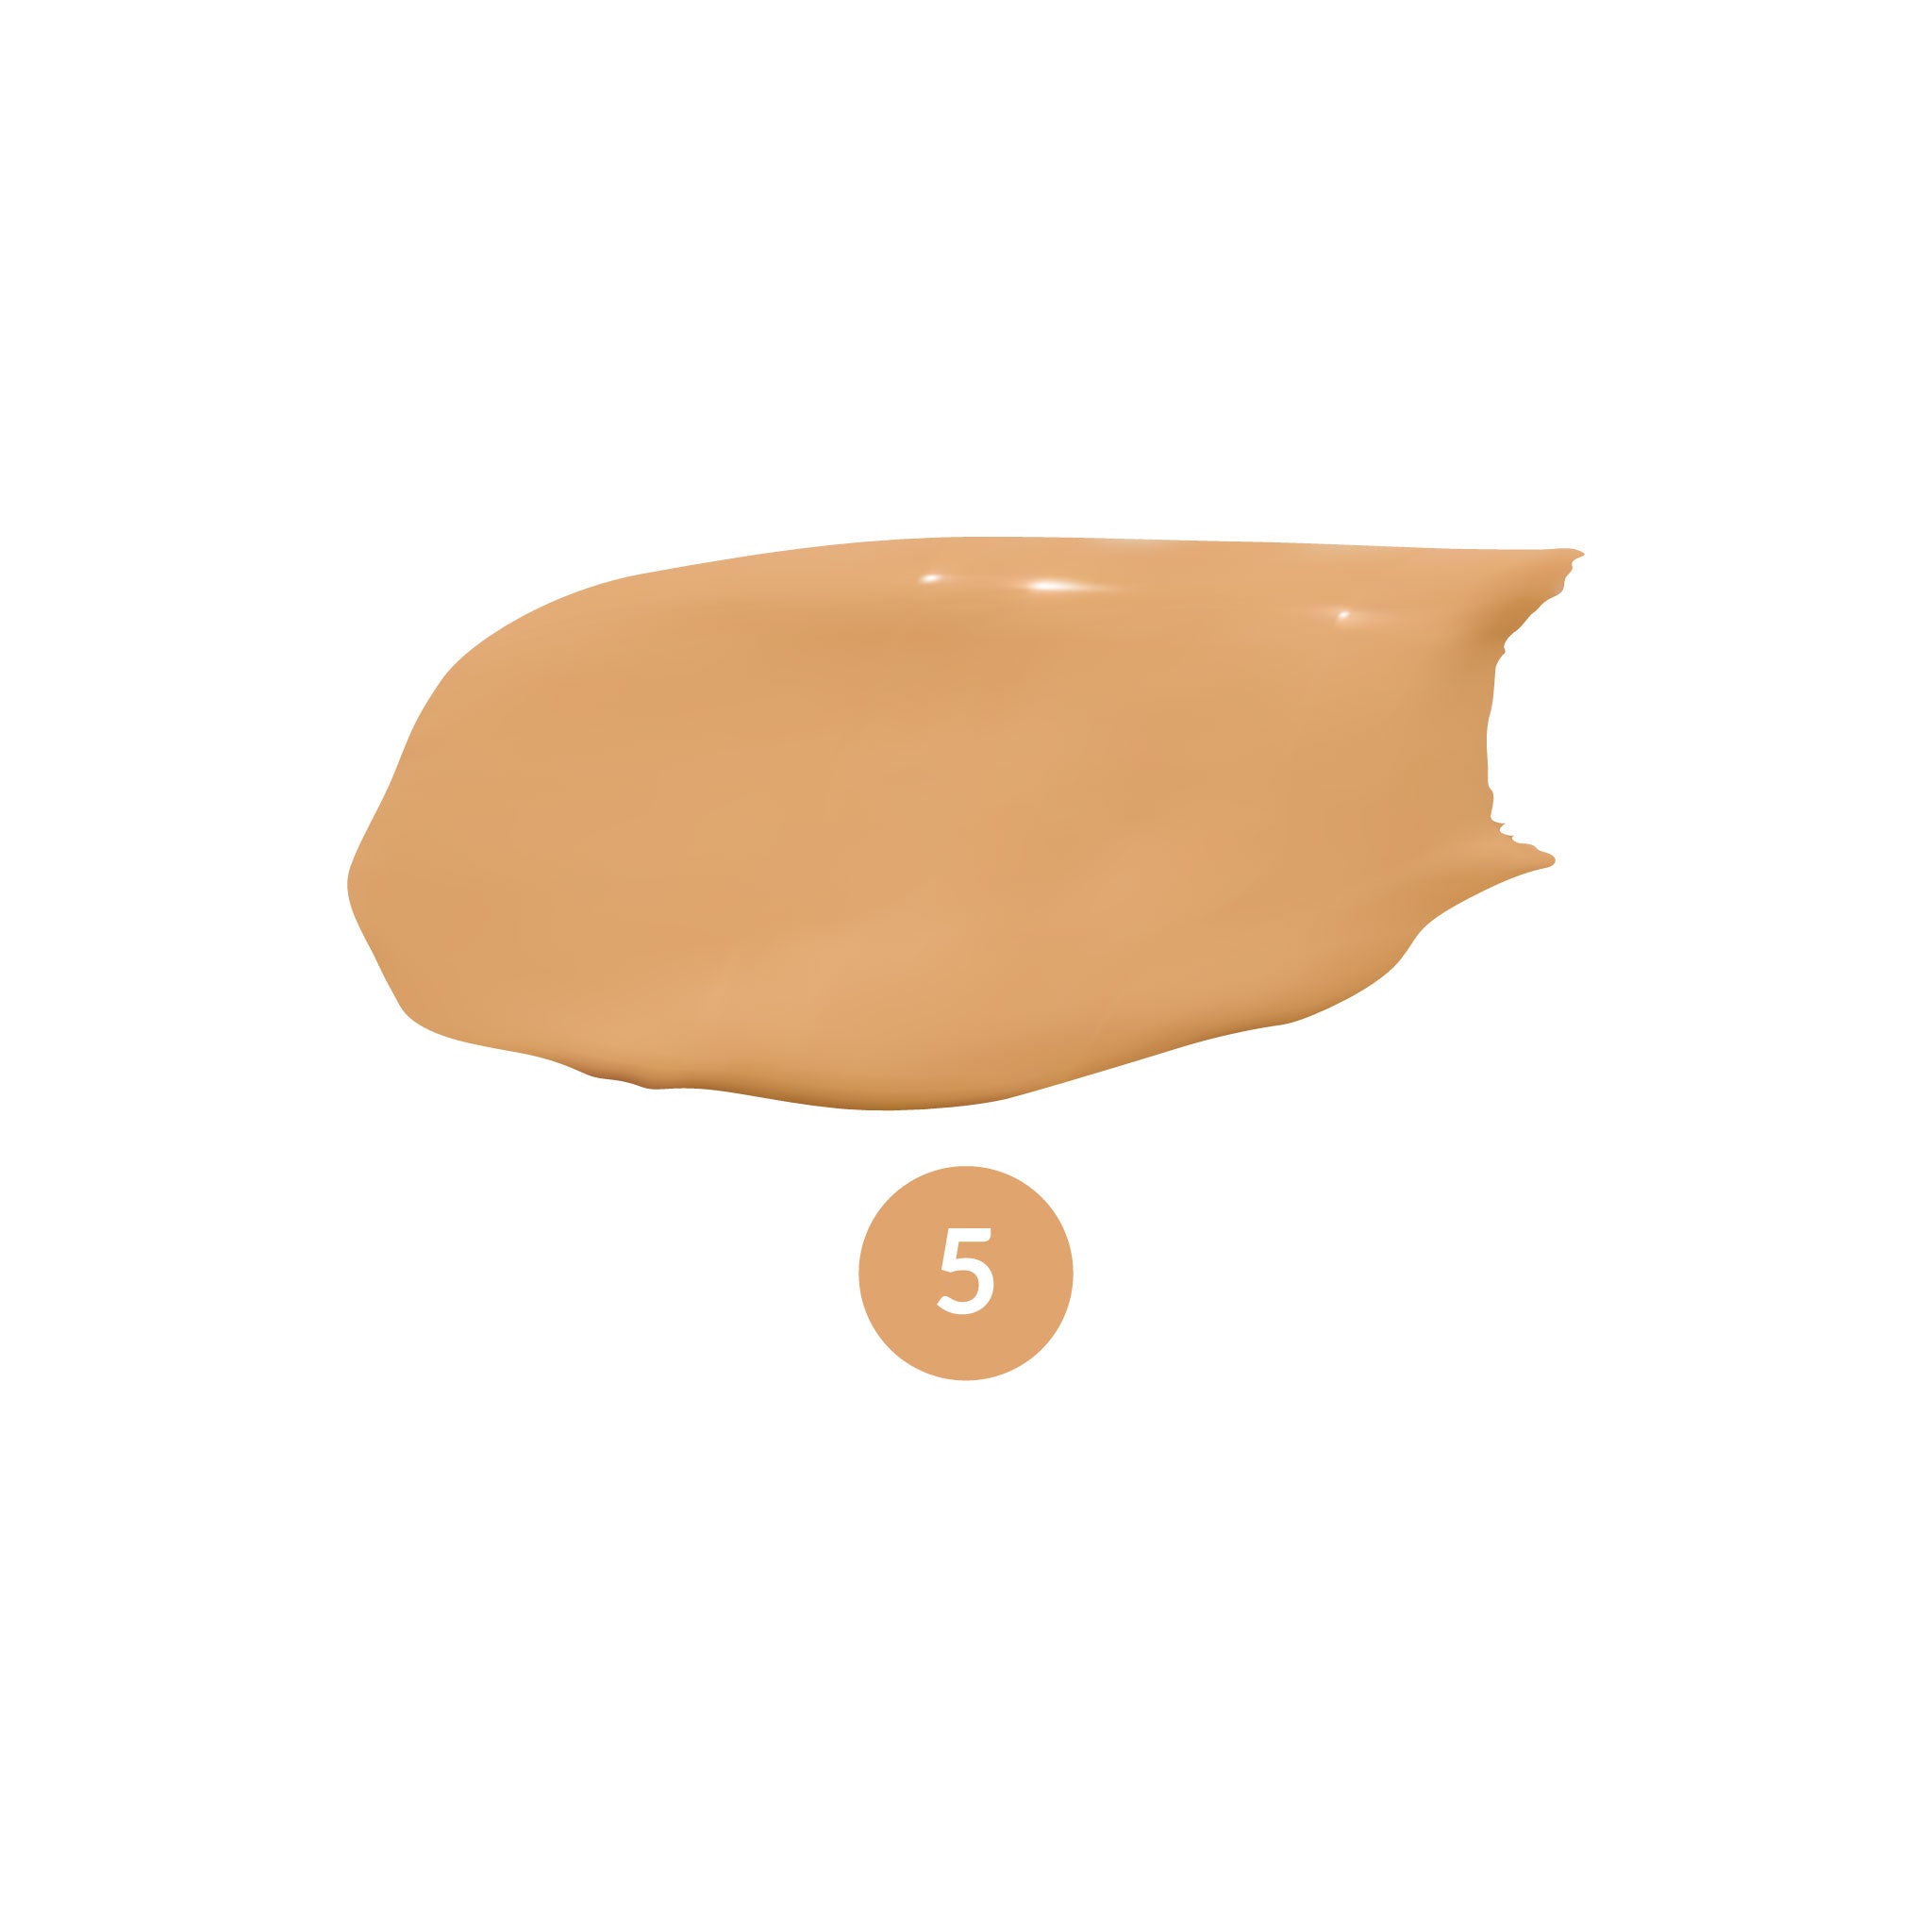 withSimplicity Liquid Foundation Swatch Shade 5